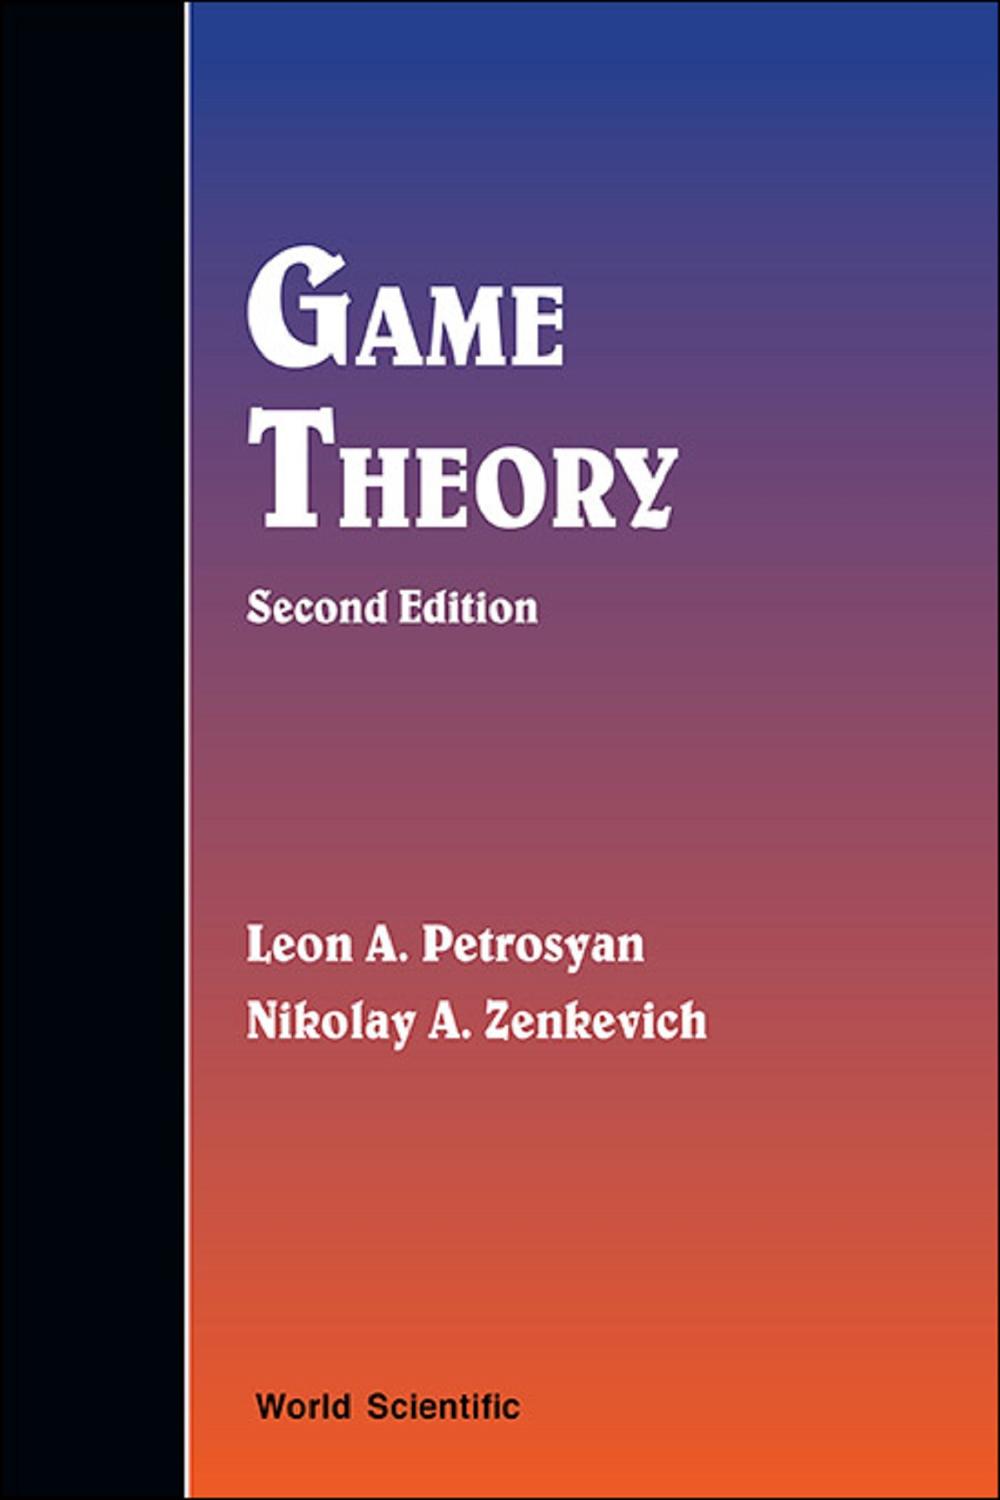 Game Theory (Second Edition) - Leon A Petrosyan, Nikolay A Zenkevich